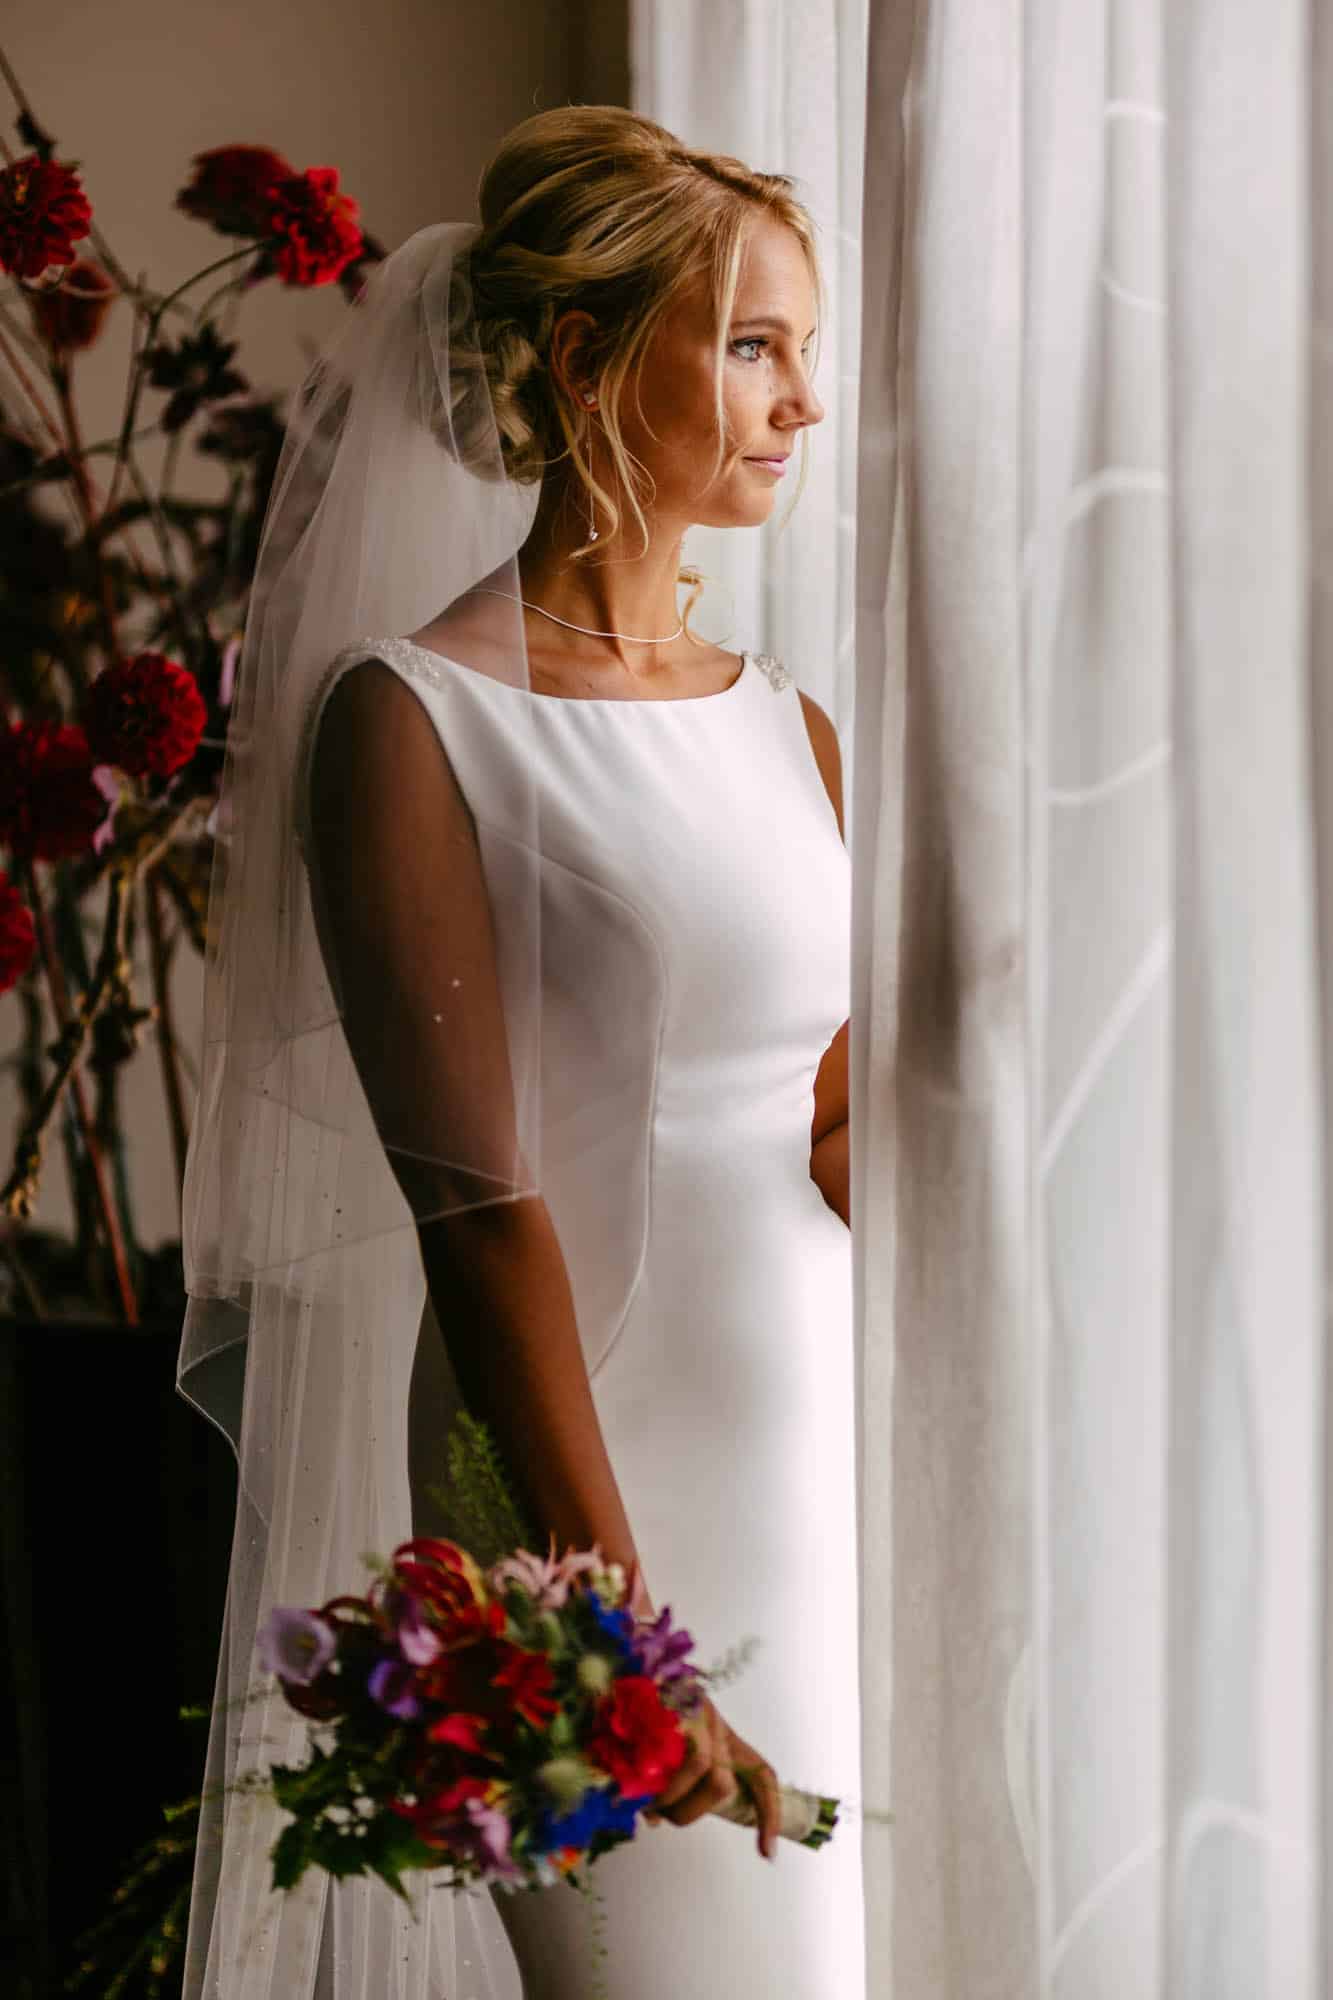 A bride in a white dress stands in front of a window.